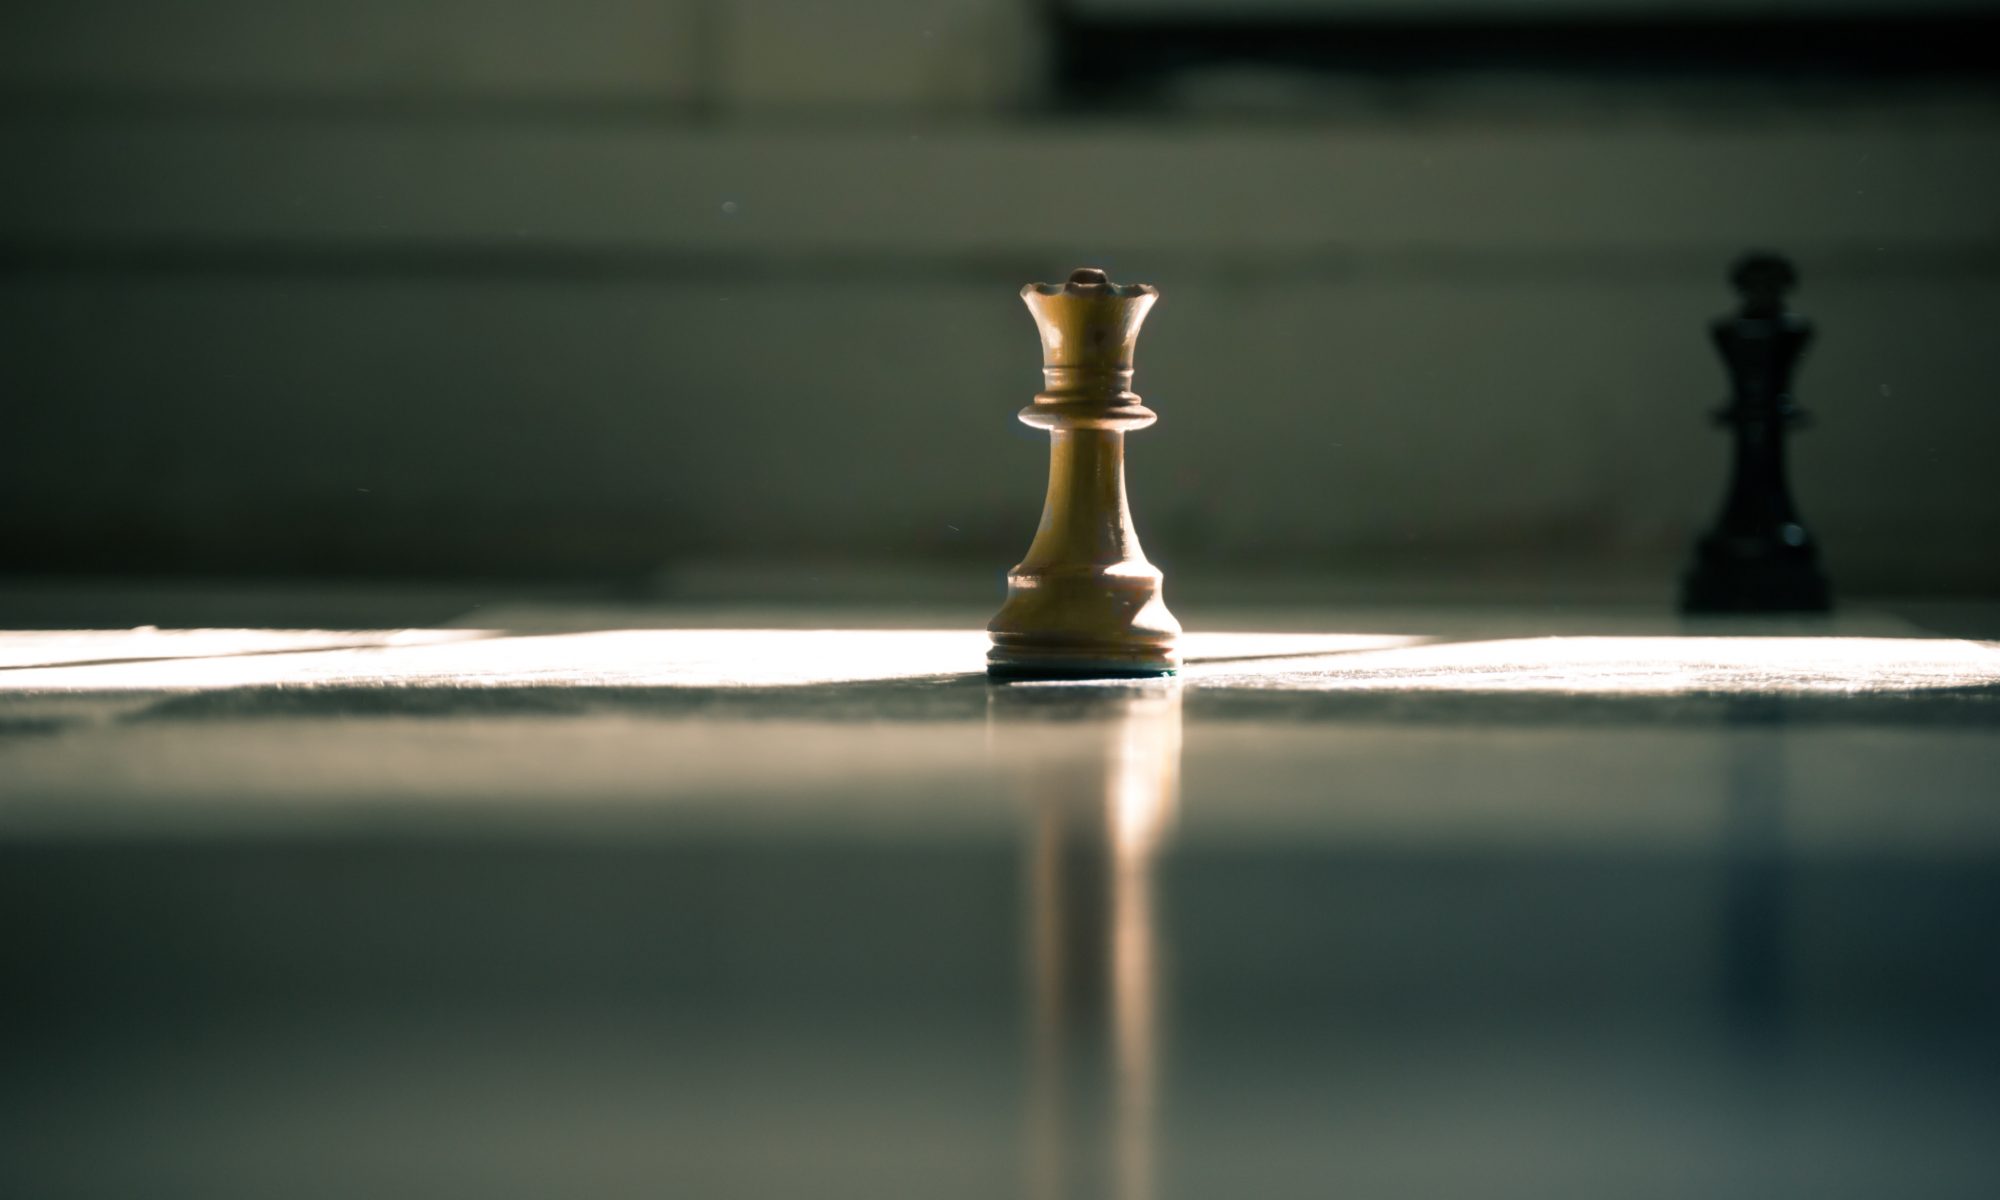 Single chess piece on a table